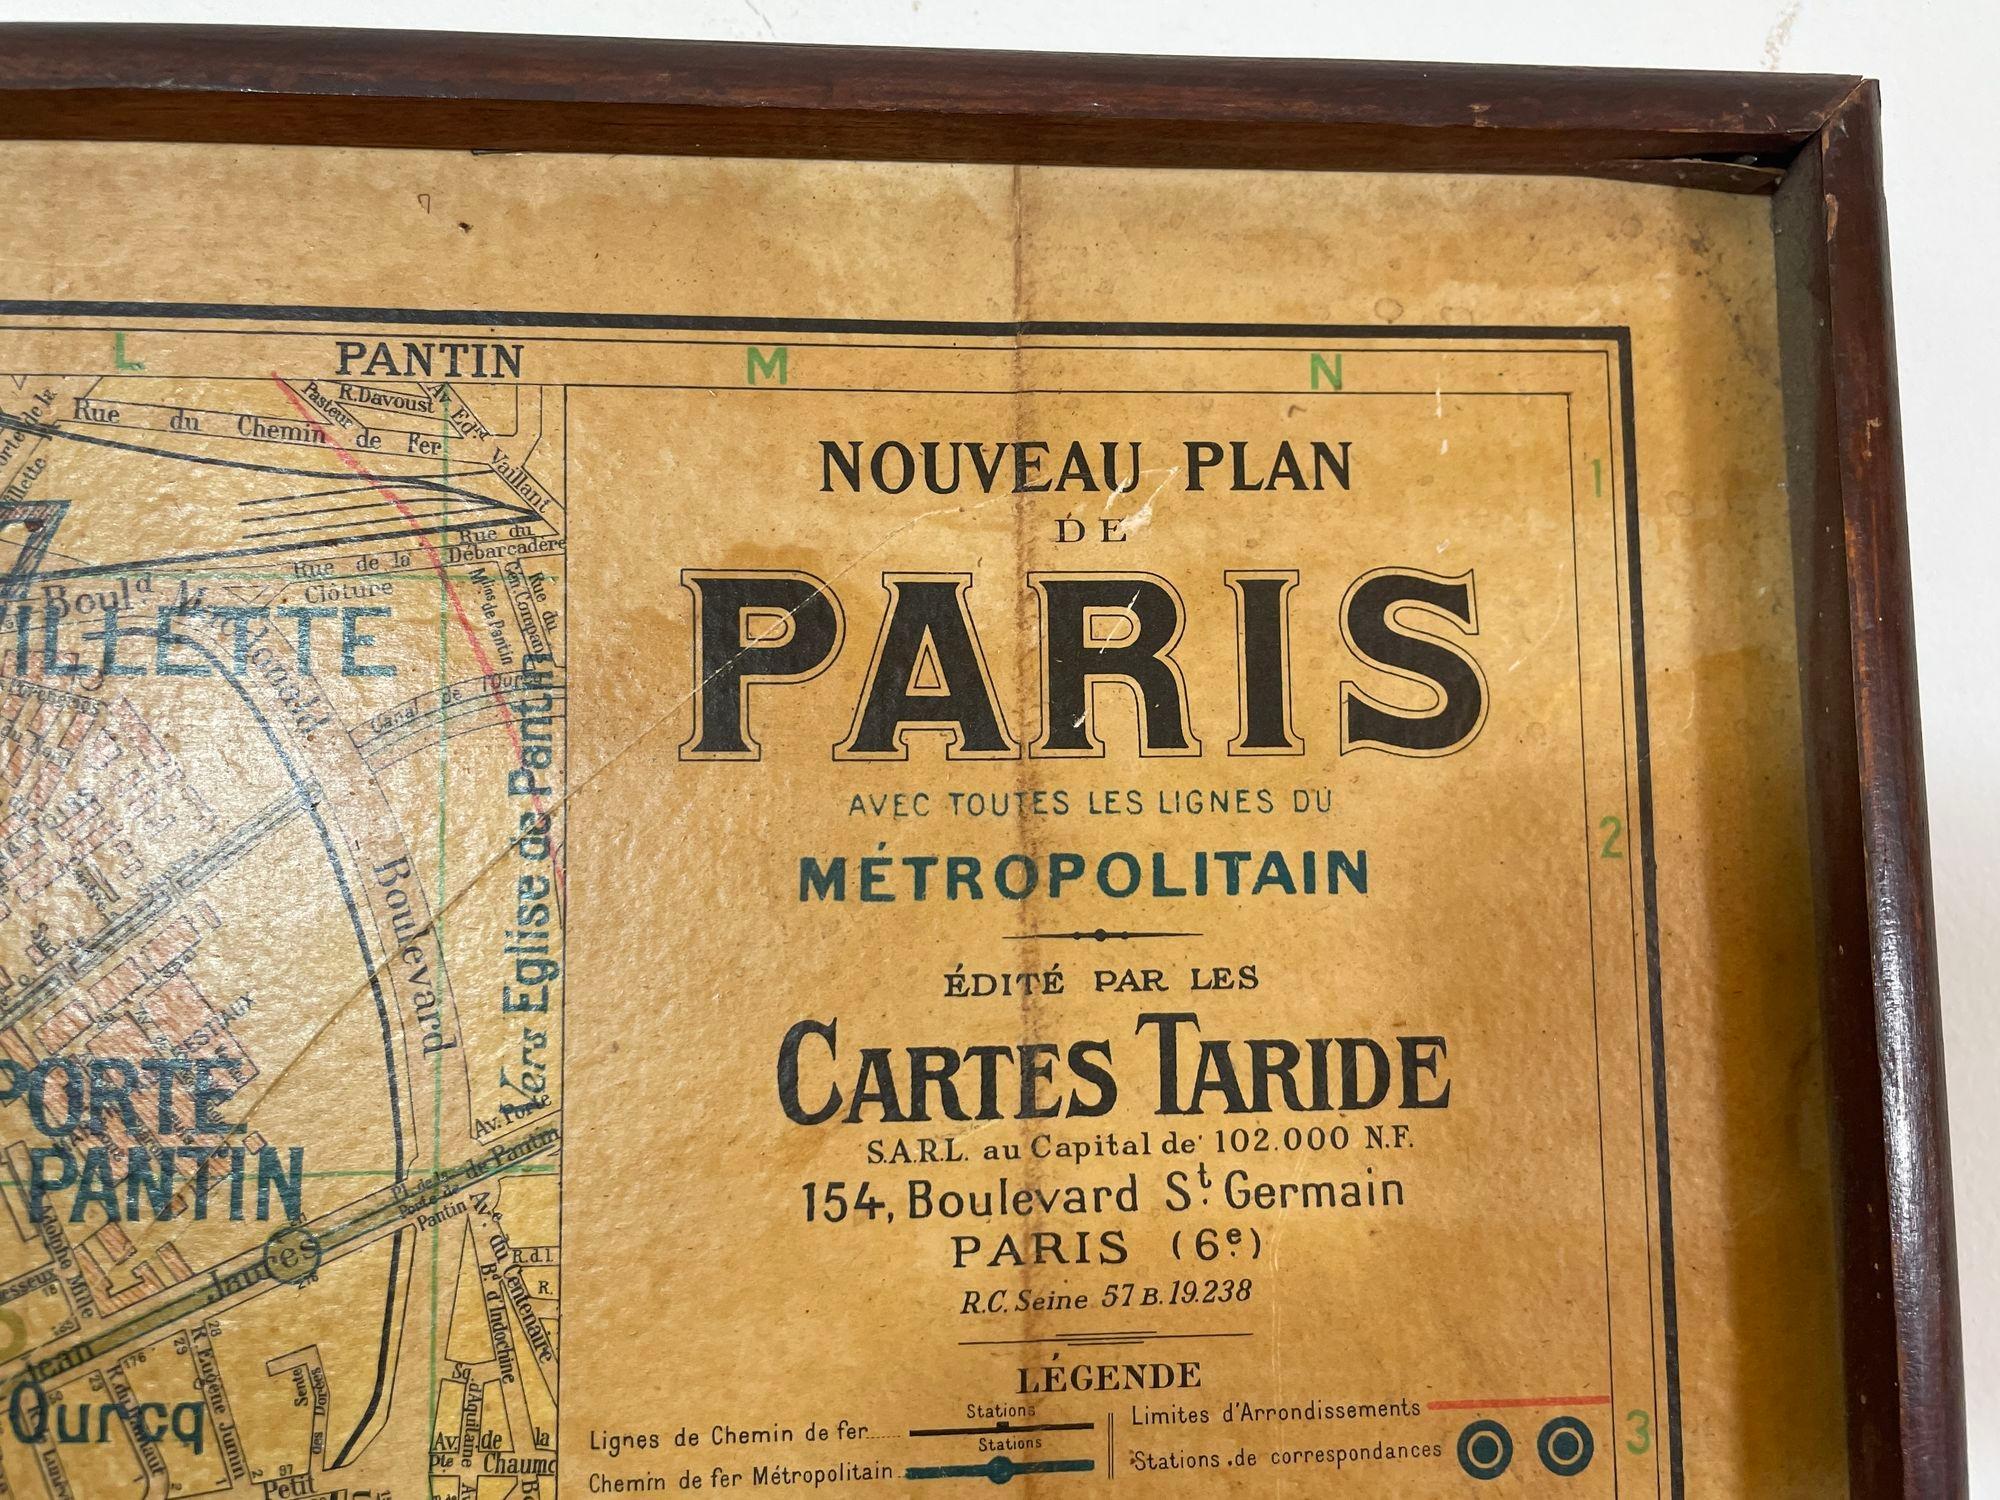 Large French Paris Metro Map 1960s.
A large Vintage French framed map of the Parisian Metro from the mid-20th century.
Featuring a Paris metro map from the midcentury period showing a nicely worn patinated appearance, the map depicts the metro and